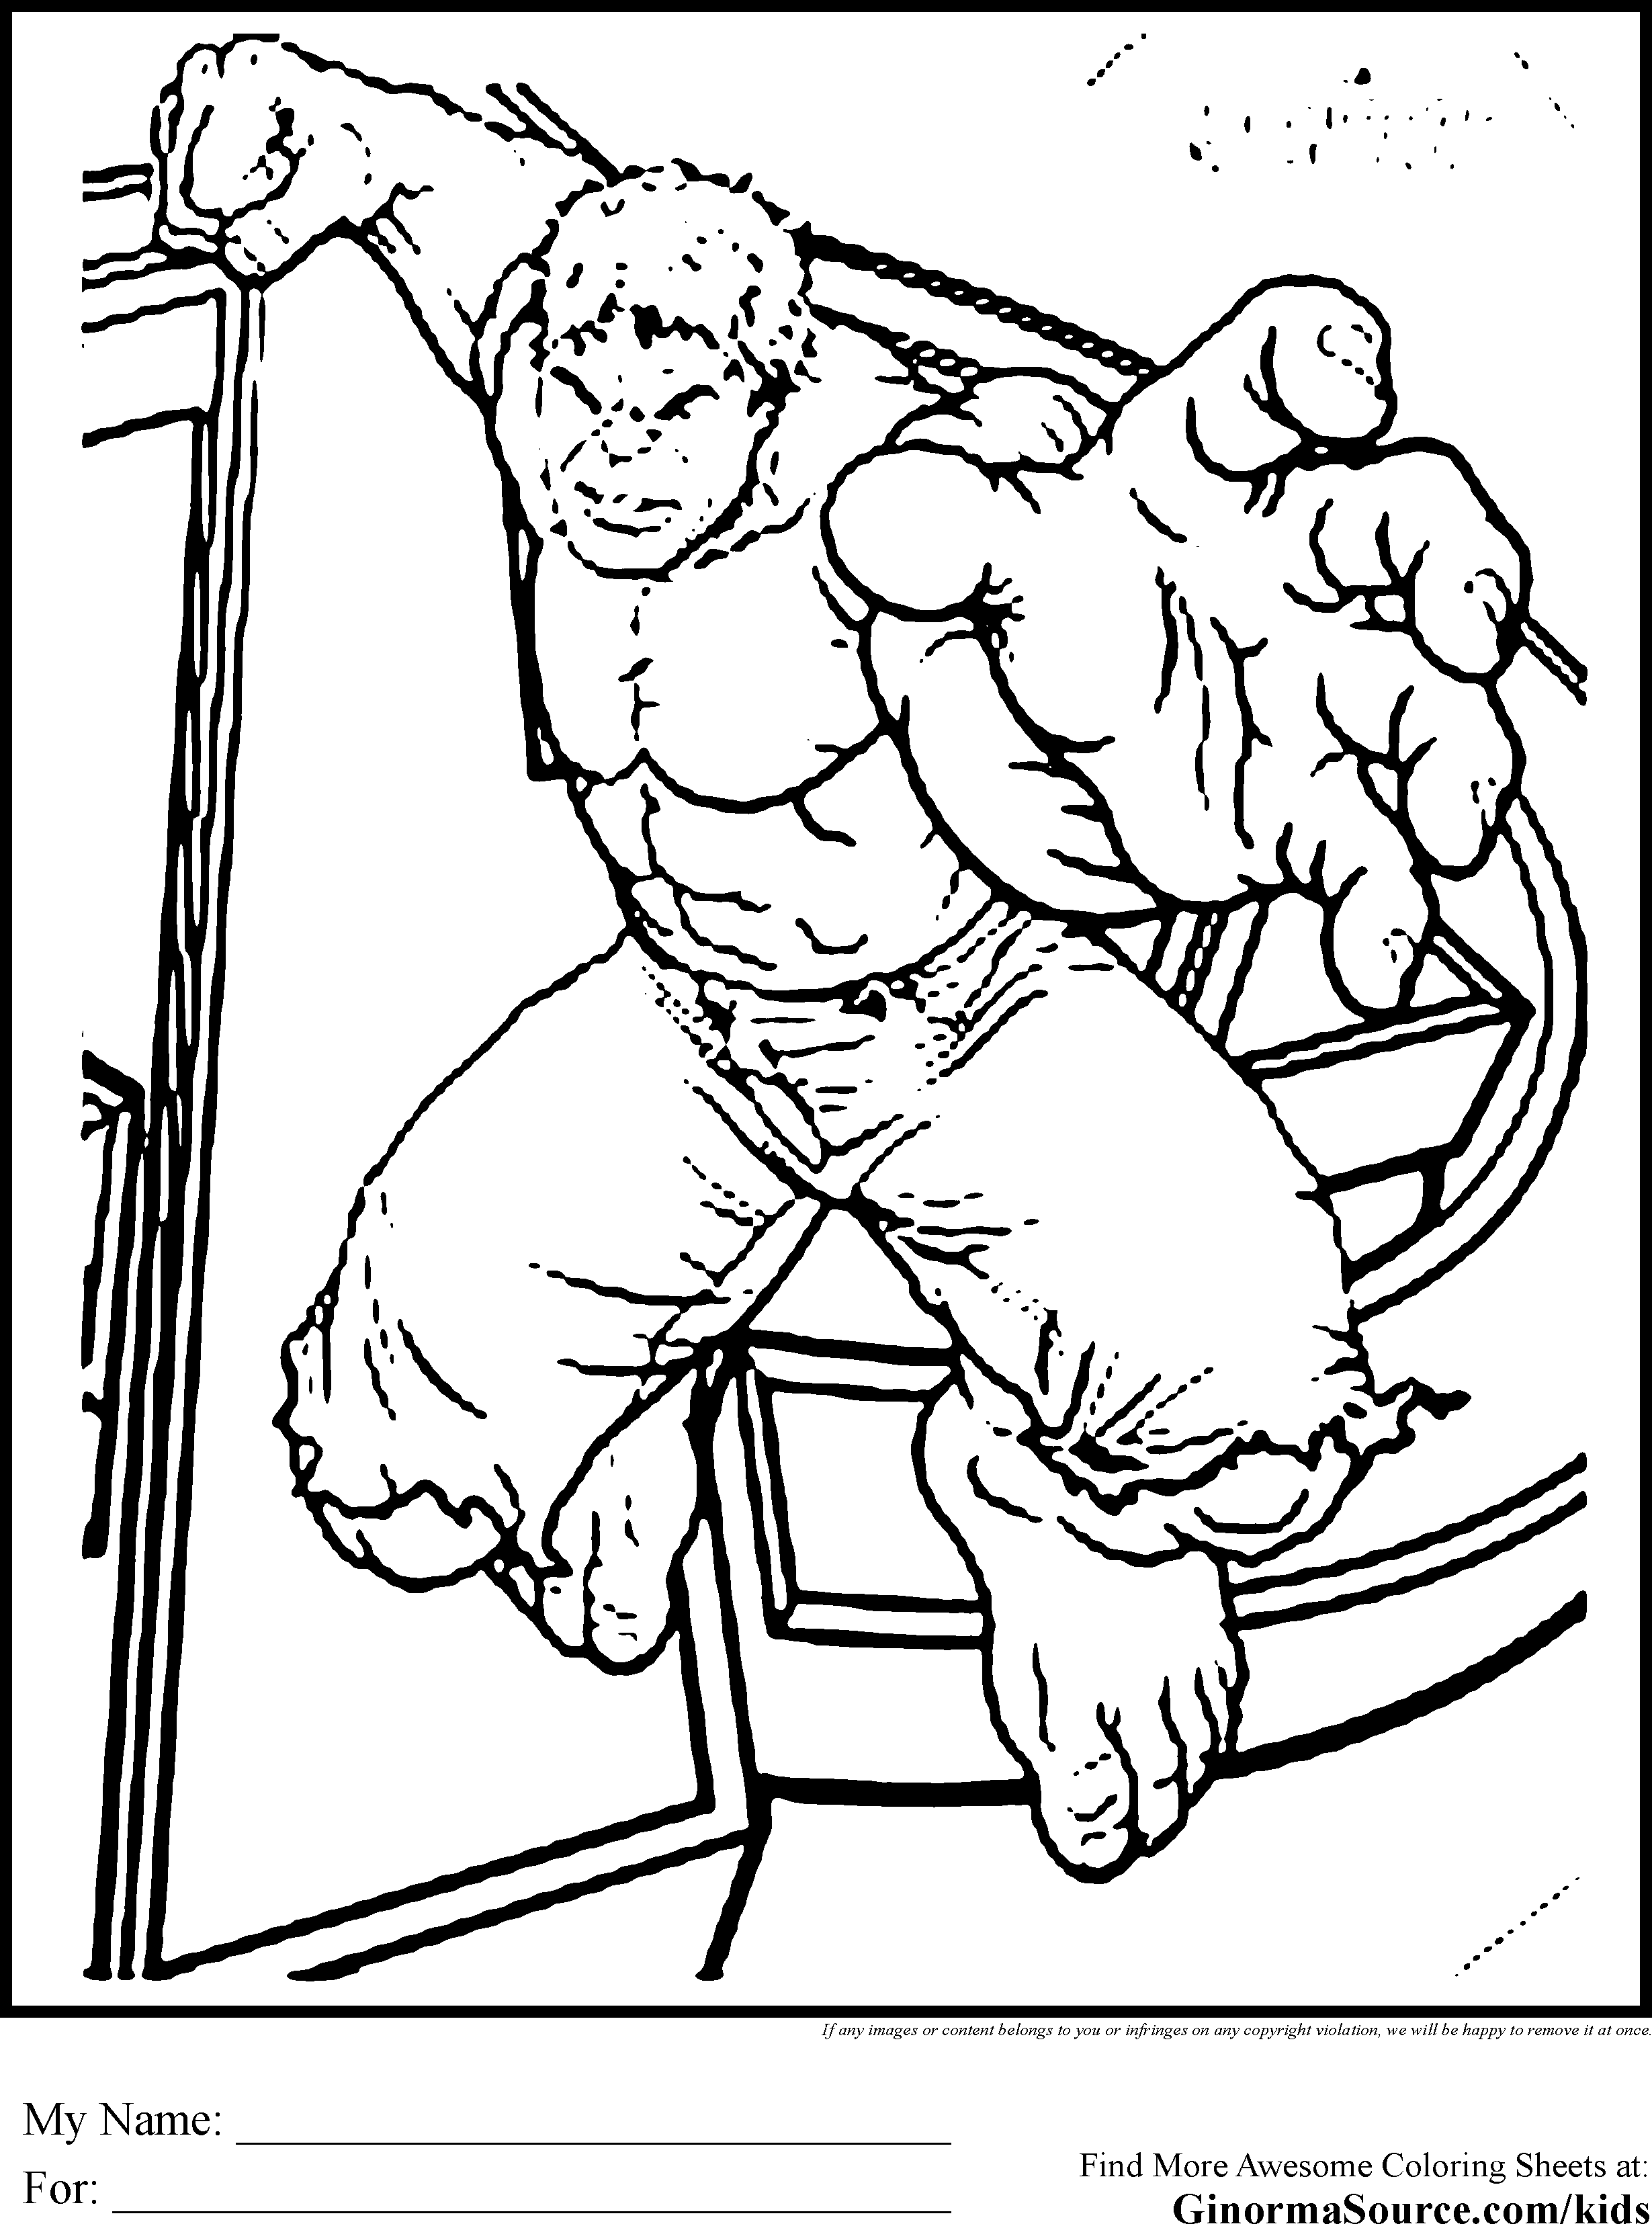 10 Pics of Baby Avengers Coloring Pages - Baby Marvel Comics ...